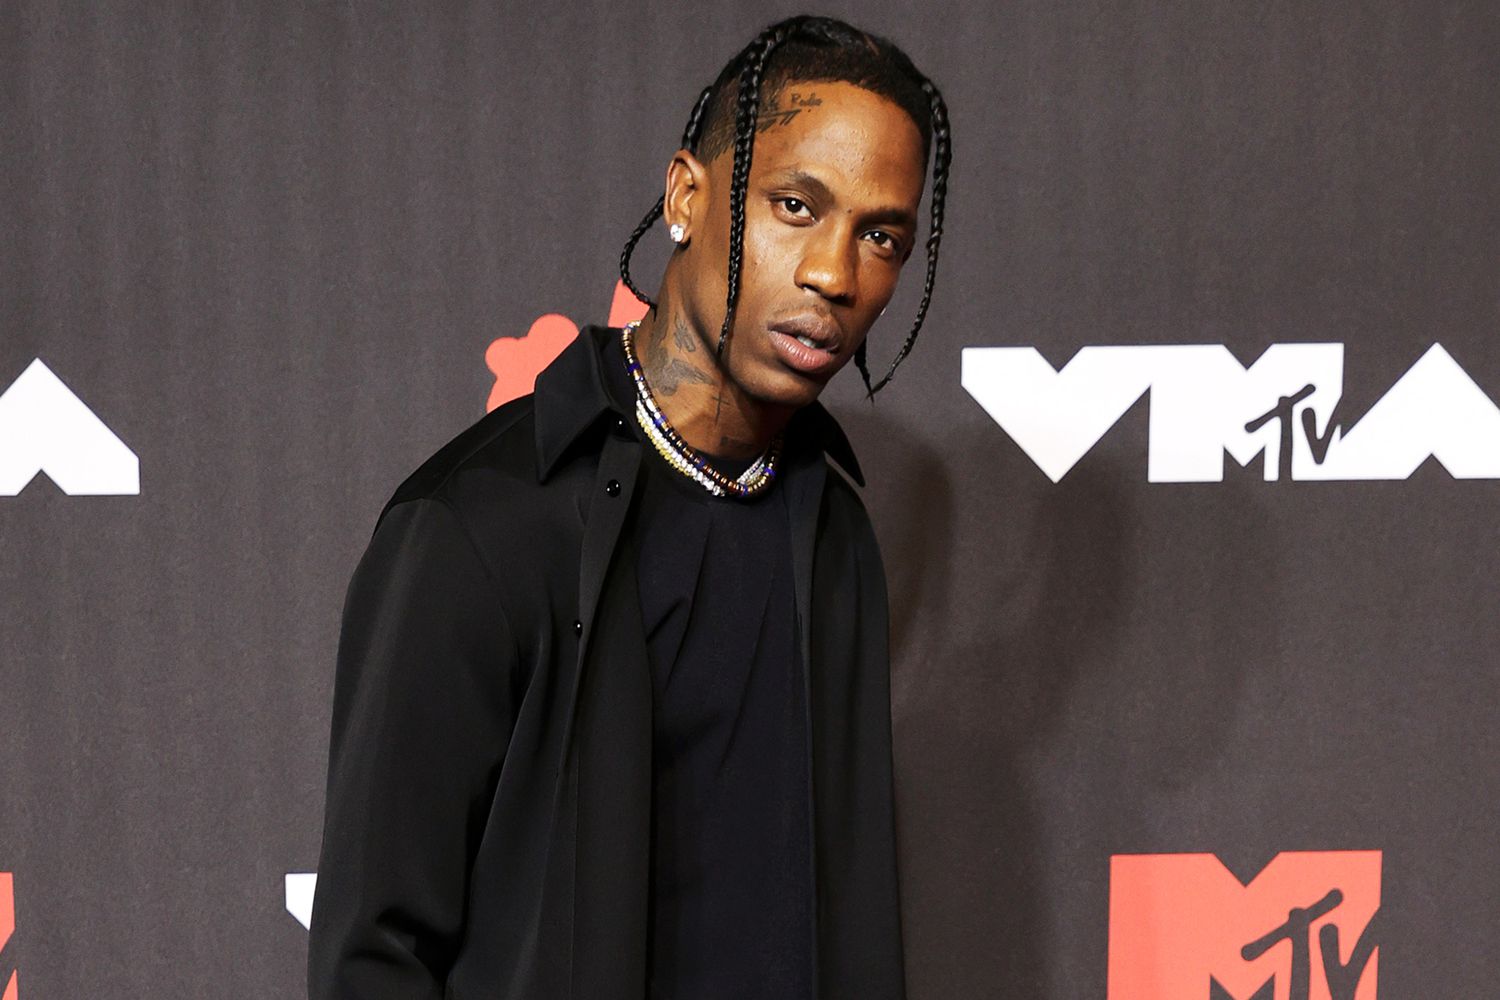 Travis Scott nightclub assault claims 'blown out of proportion,' lawyer says